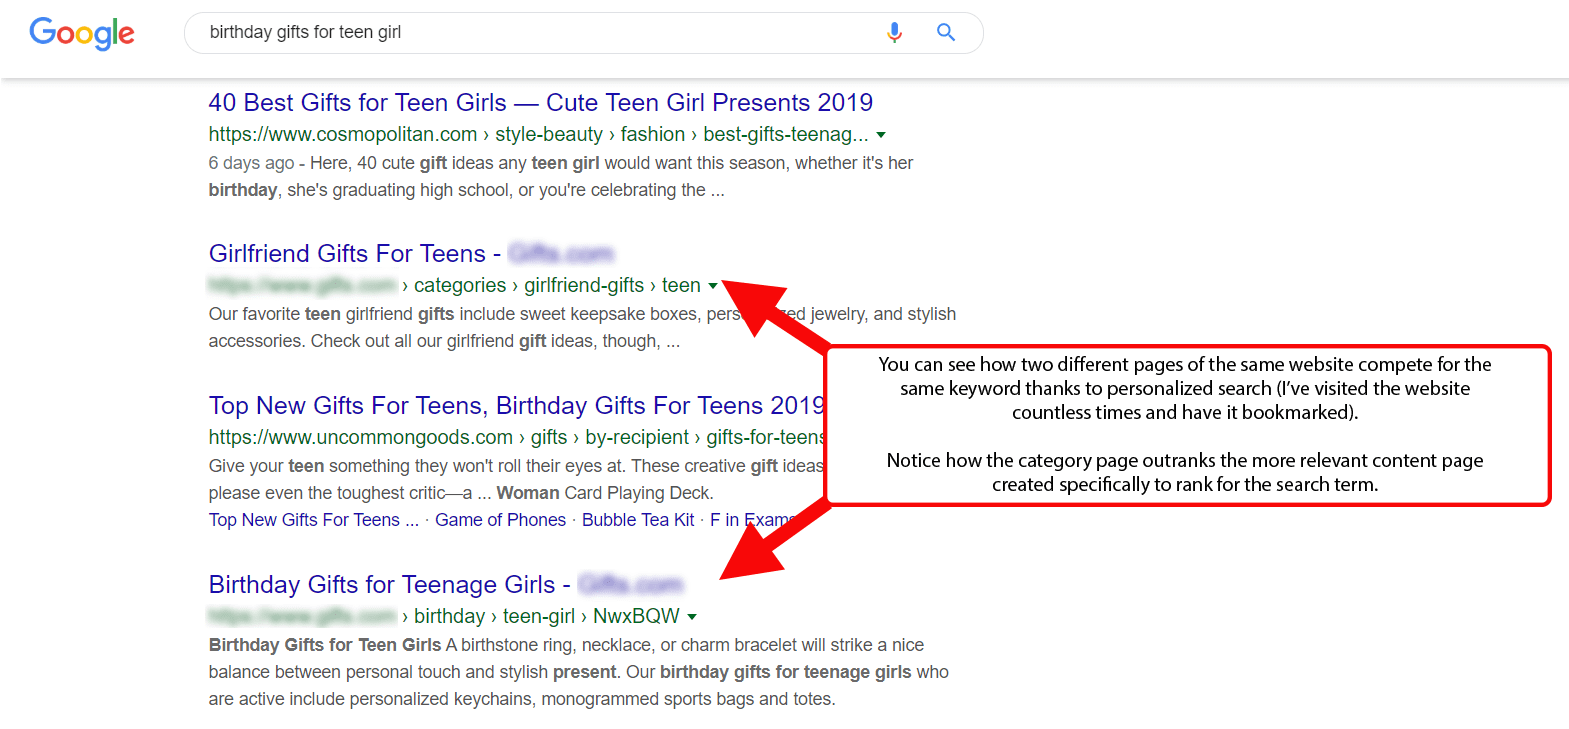 A category outranks a content page for the same term in the SERP